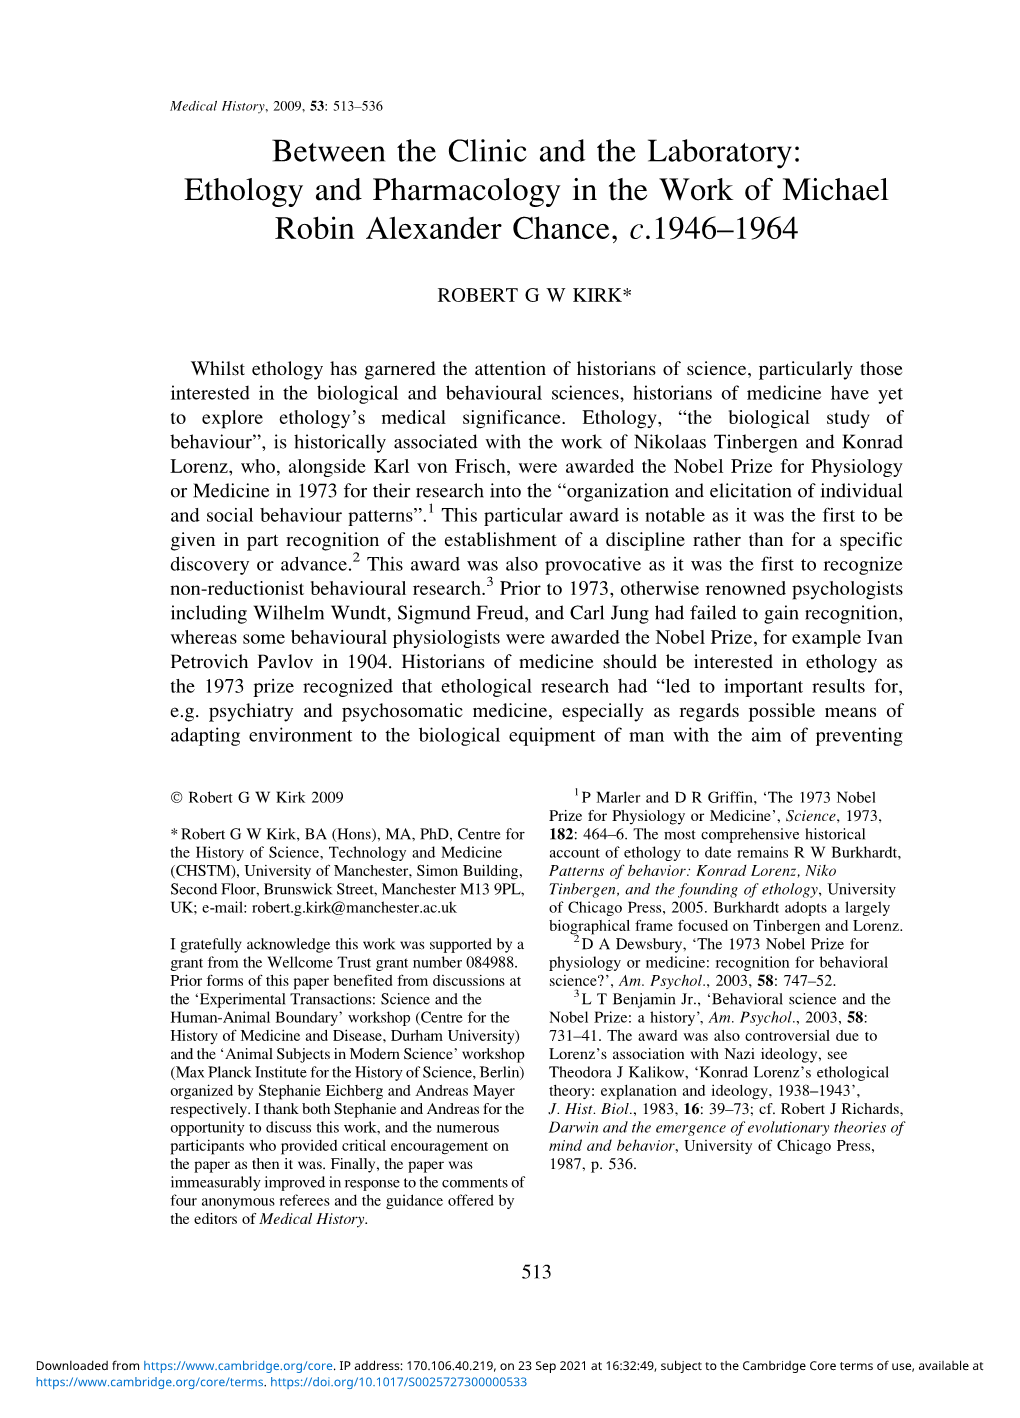 Between the Clinic and the Laboratory: Ethology and Pharmacology in the Work of Michael Robin Alexander Chance, C.1946–1964